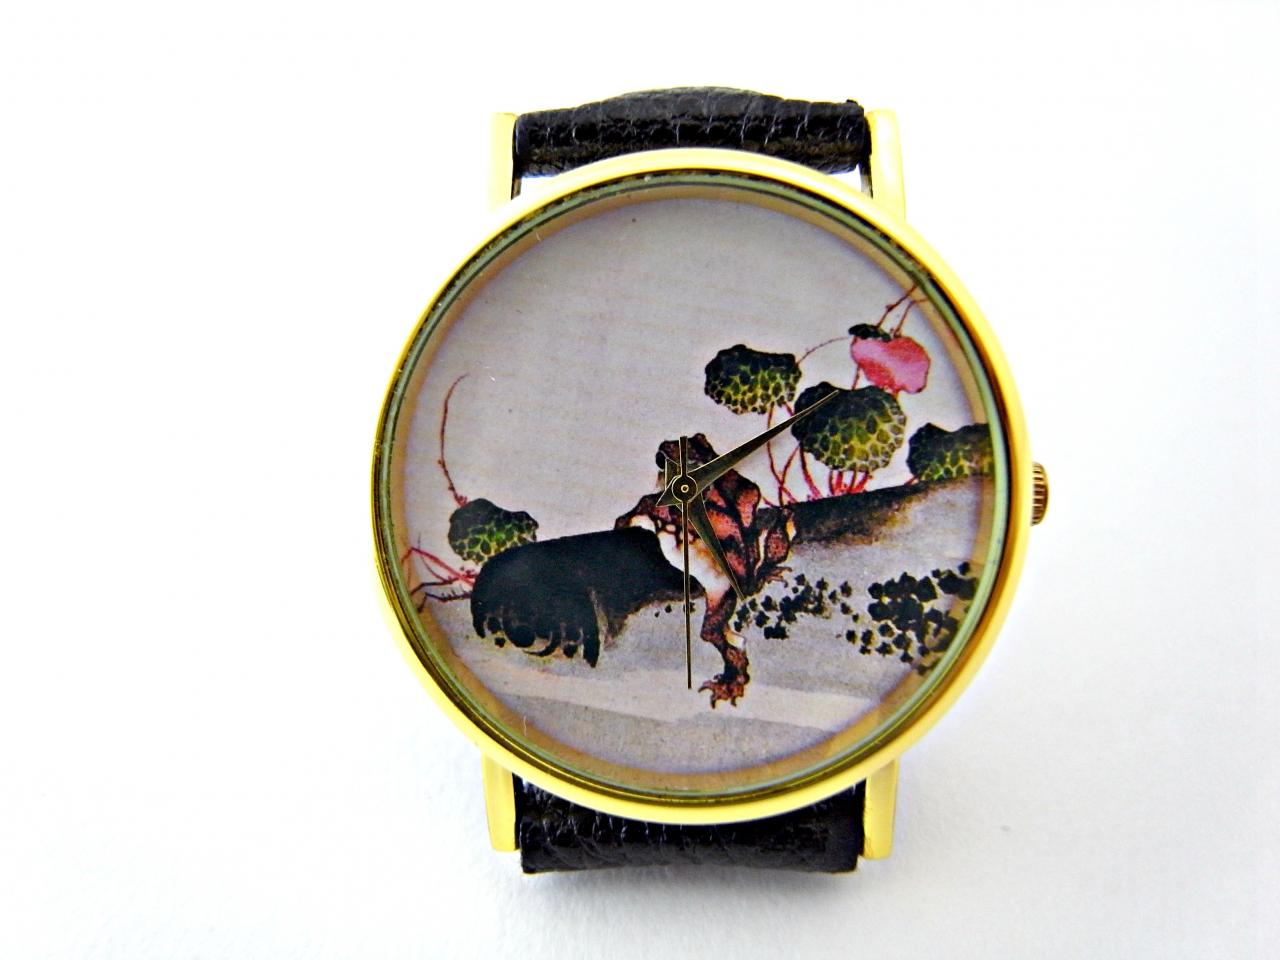 Frog Leather Wrist Watches, Woman Man Lady Unisex Watch, Genuine Leather Handmade Unique Watch #61